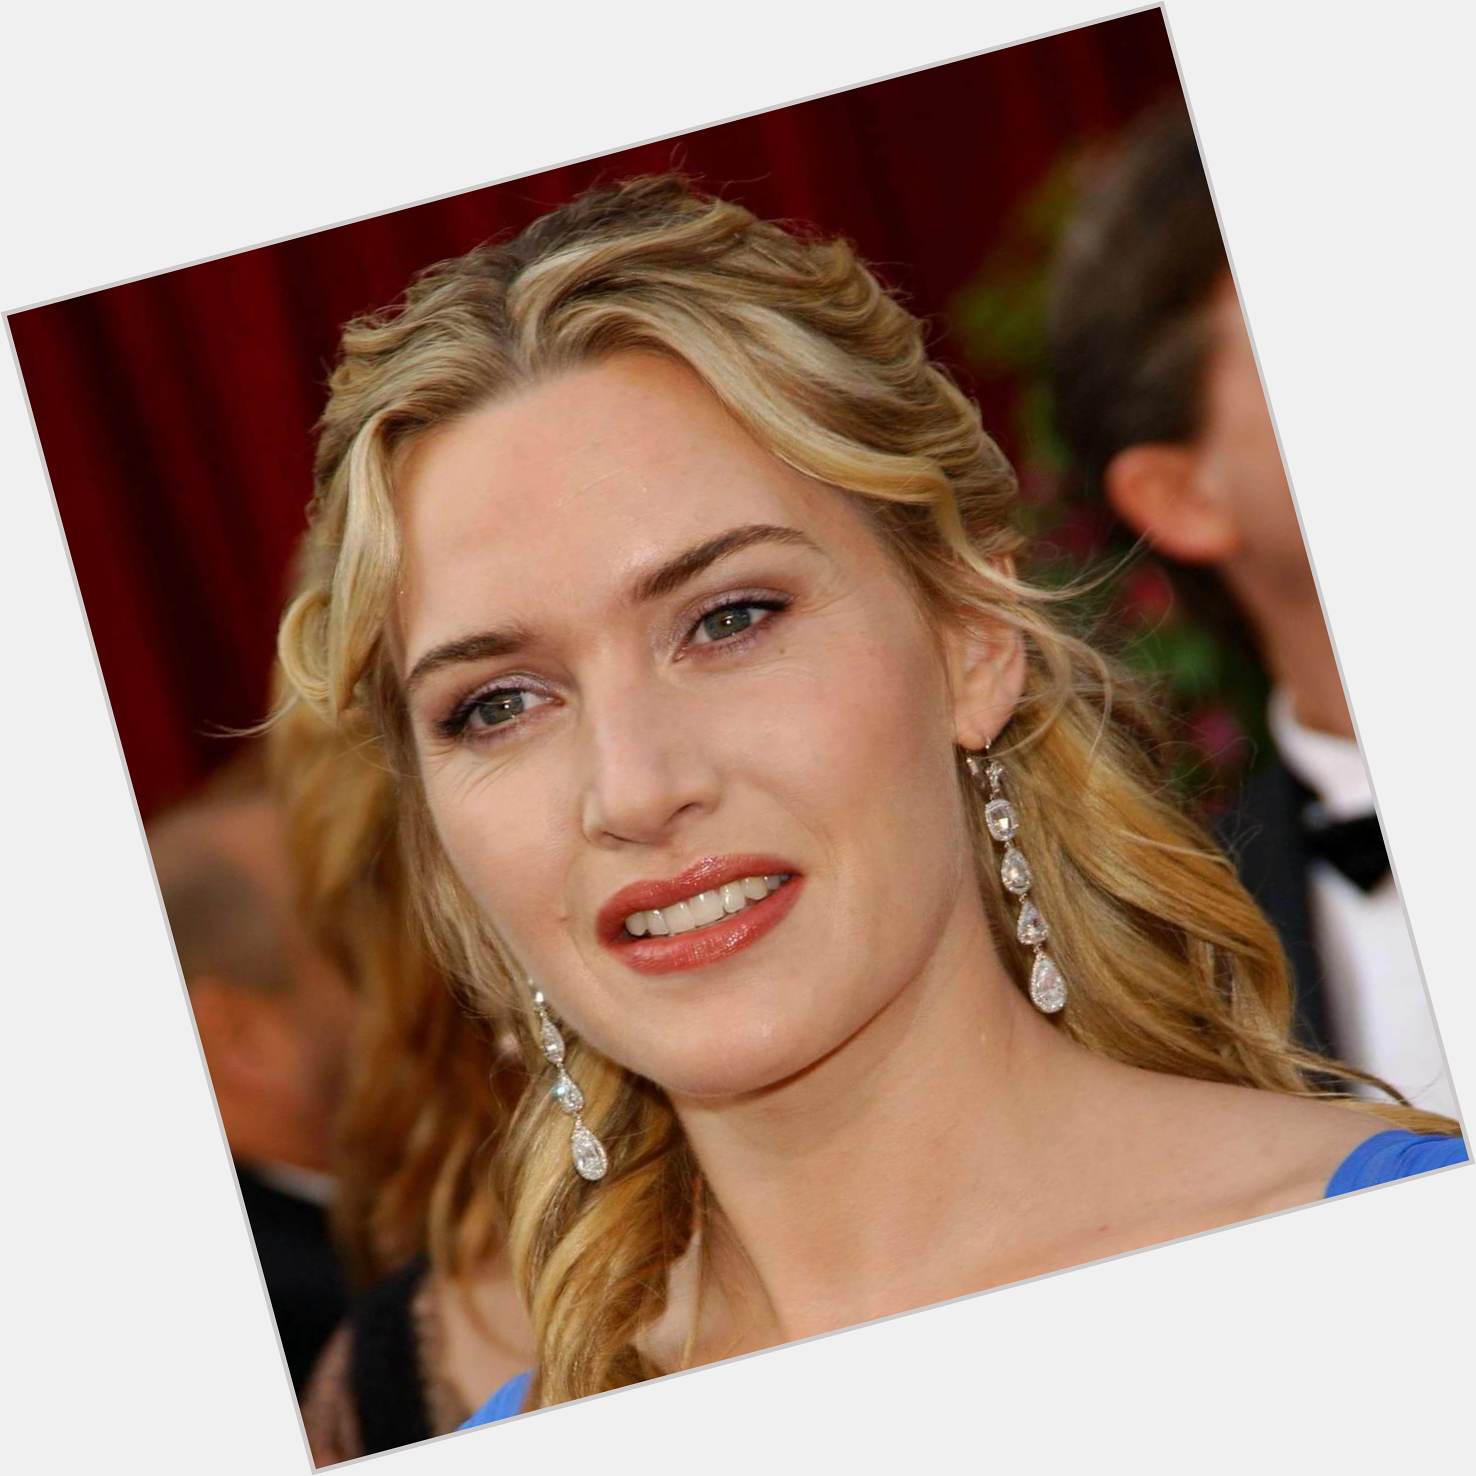 Happy birthday to you
Miss Kate Winslet!!!                         !!!      